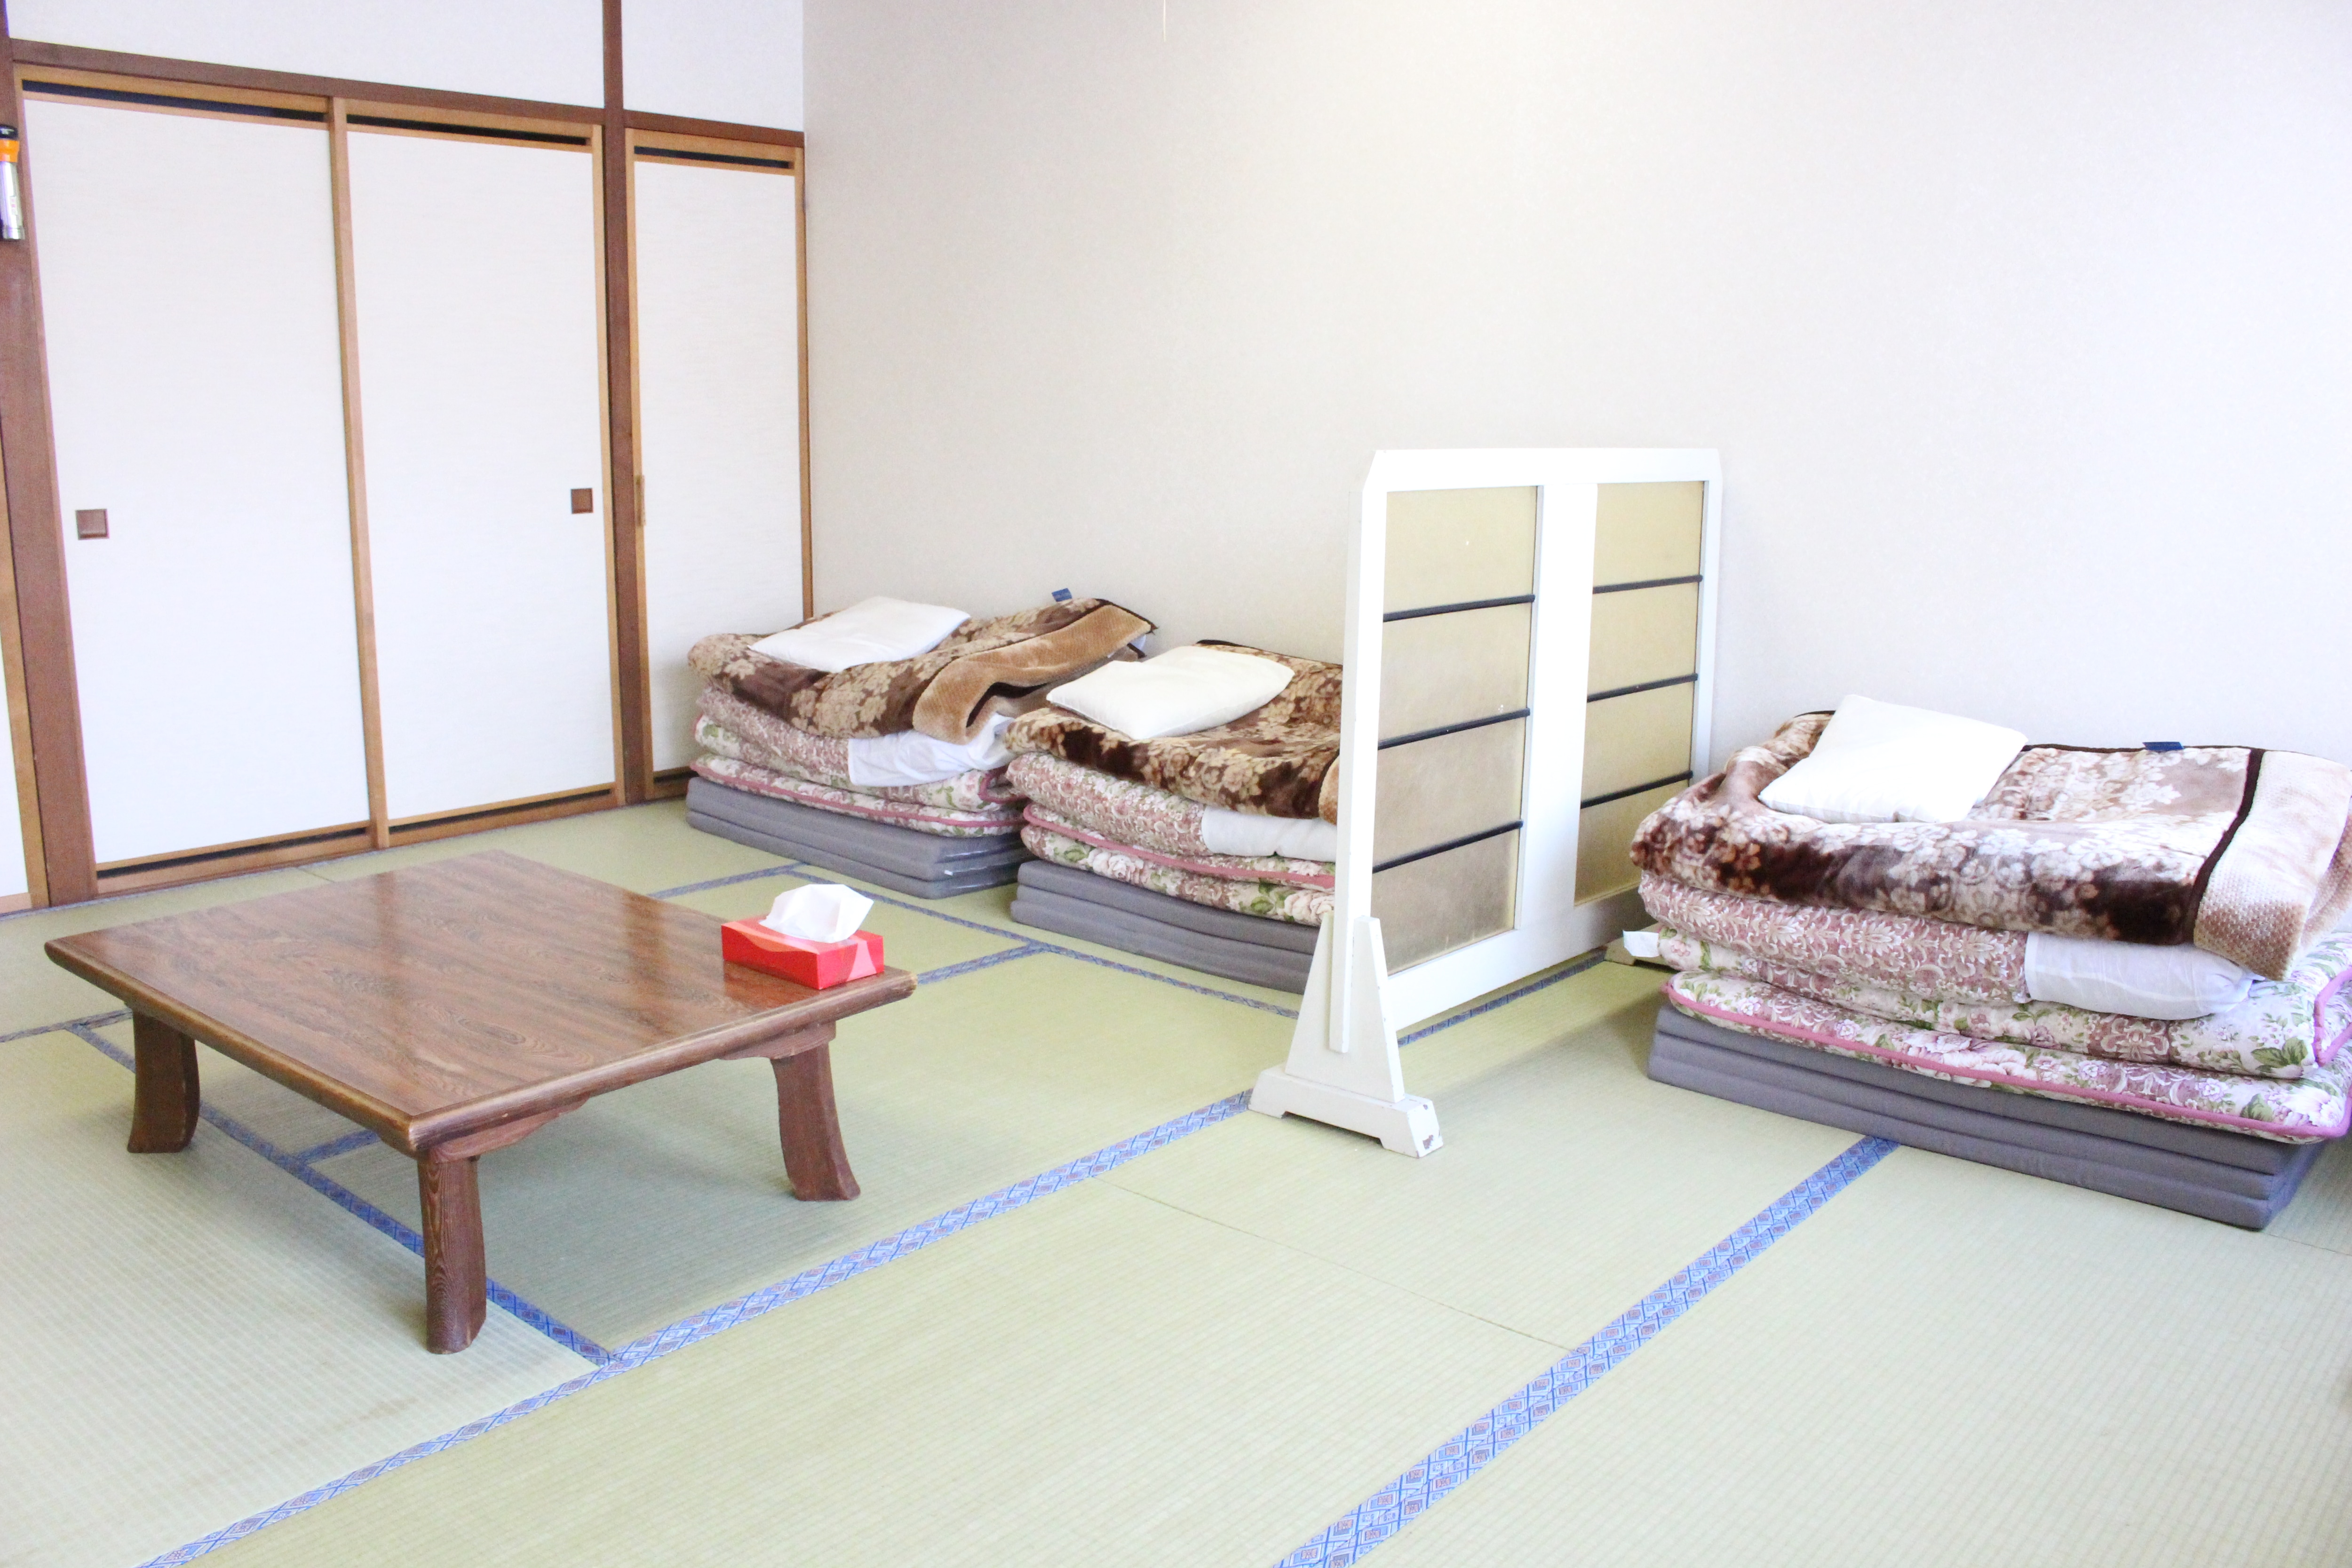 Japanese-style dormitory for men and women